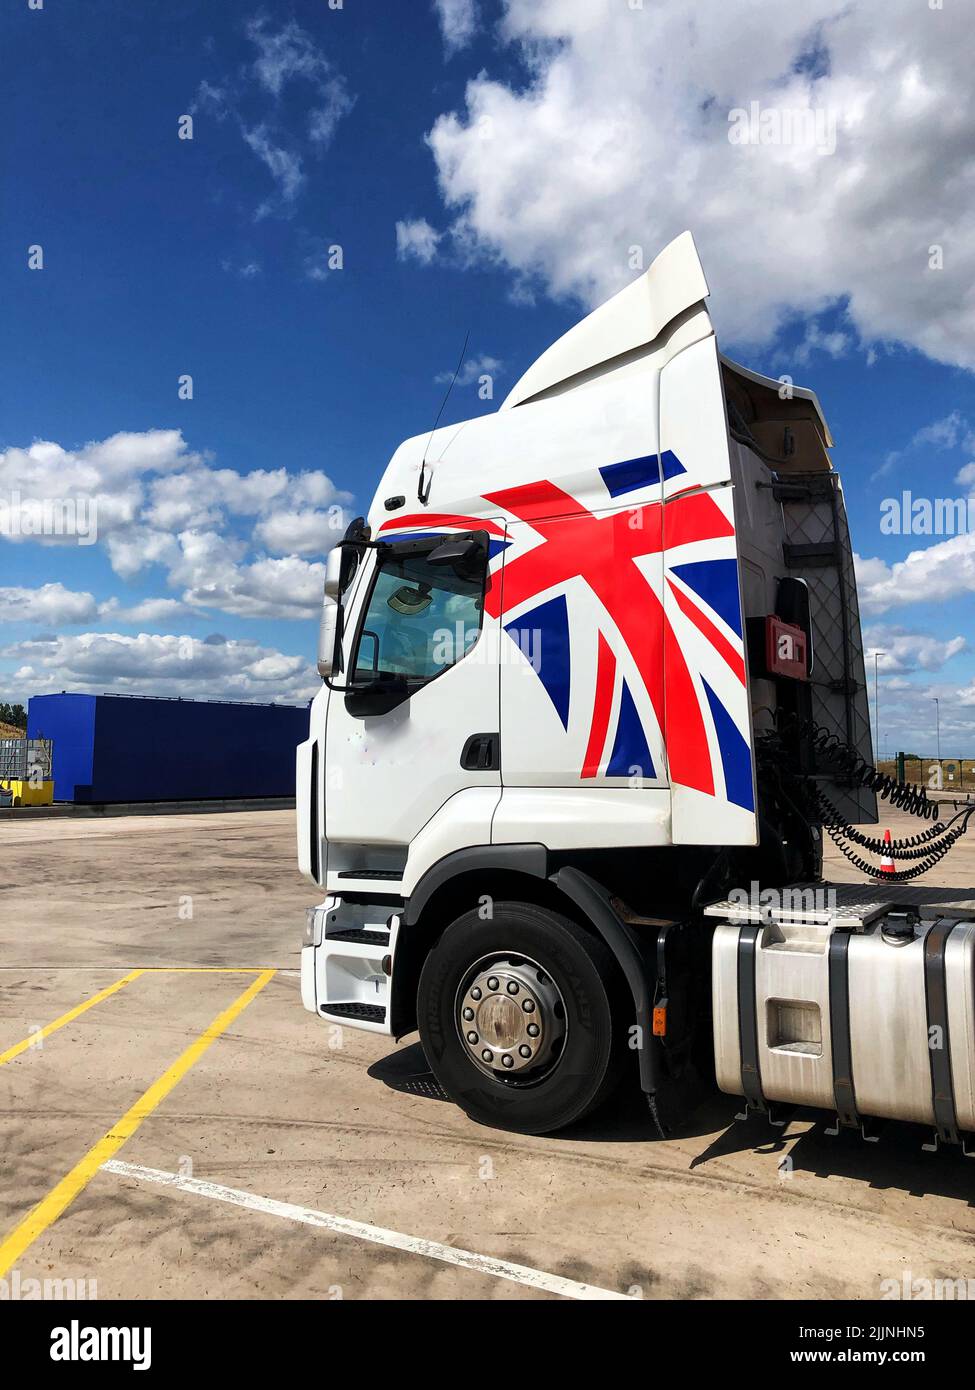 A lorry or truck cab of a British haulage company with a patriotic Union Jack flag painted on the profile Stock Photo